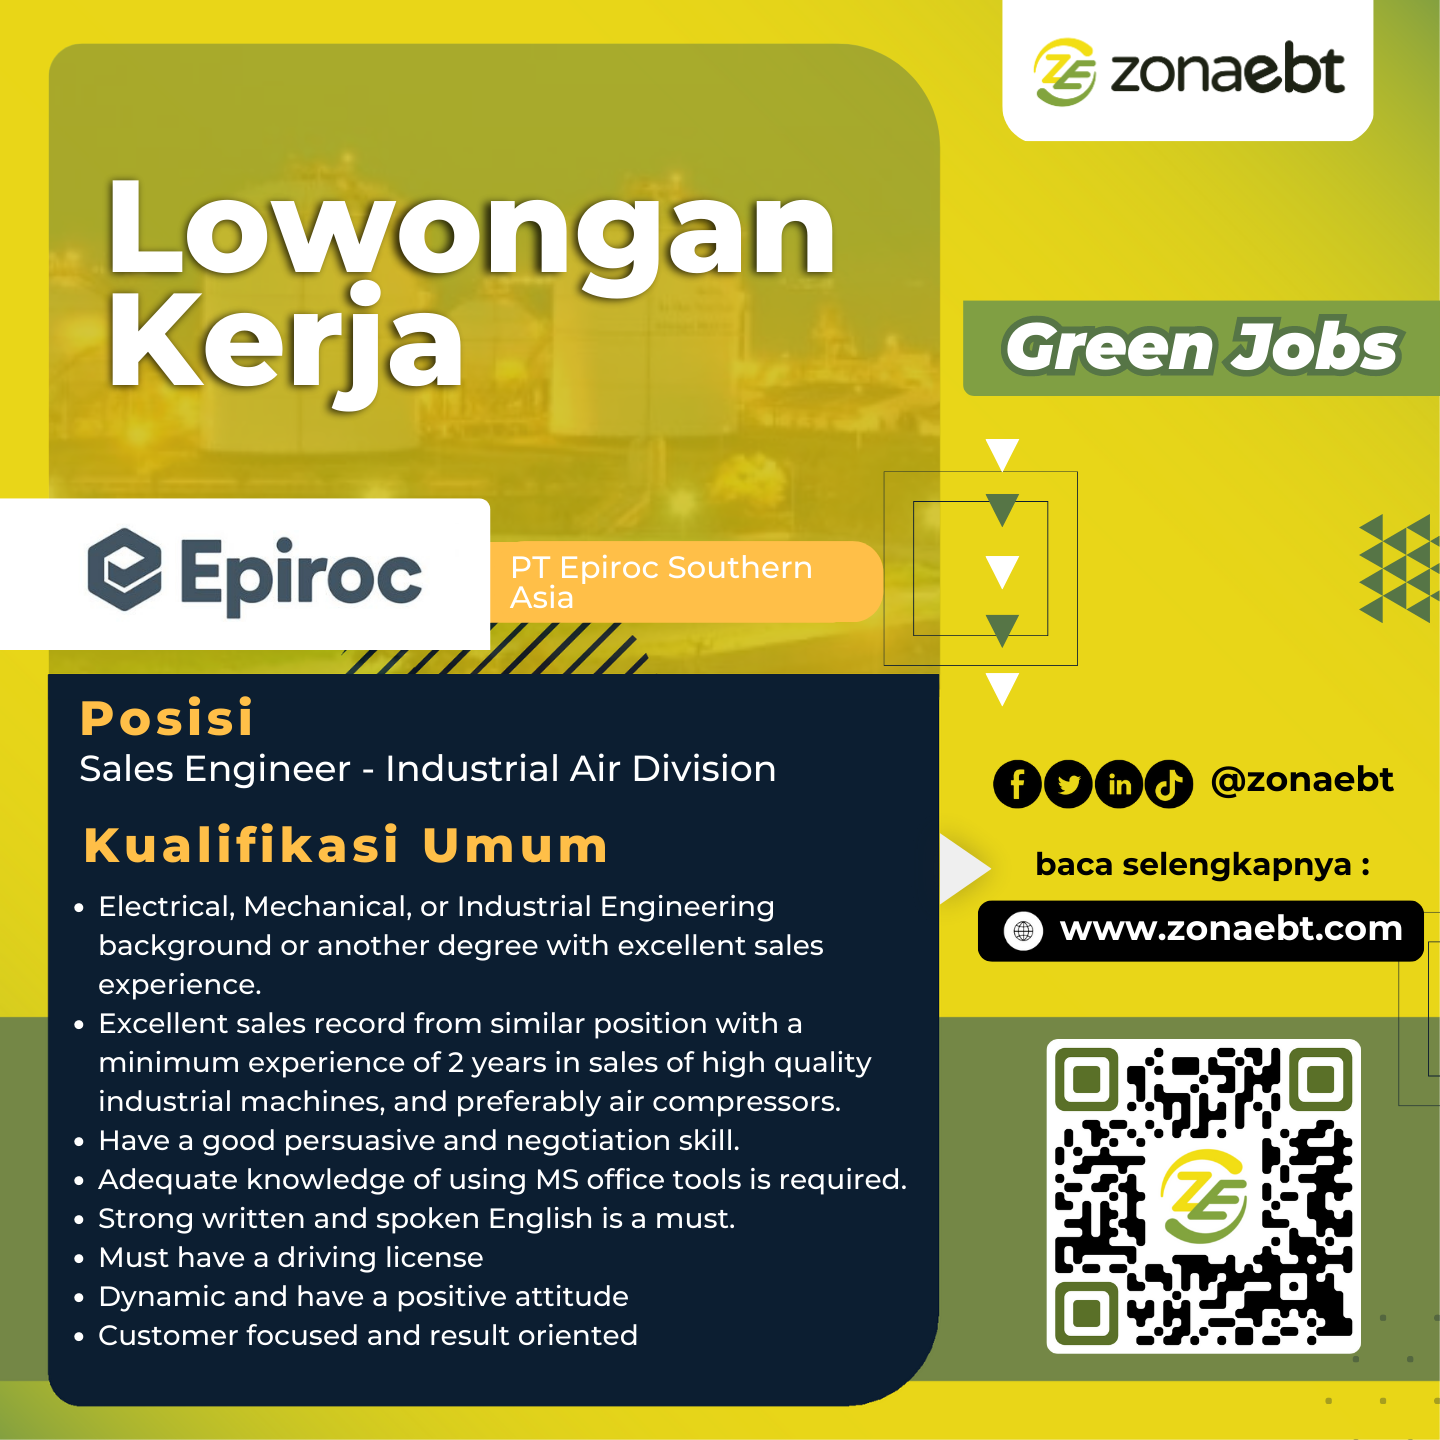 PT Epiroc Southern Asia Sales Engineer - Industrial Air Division zonaebt.com